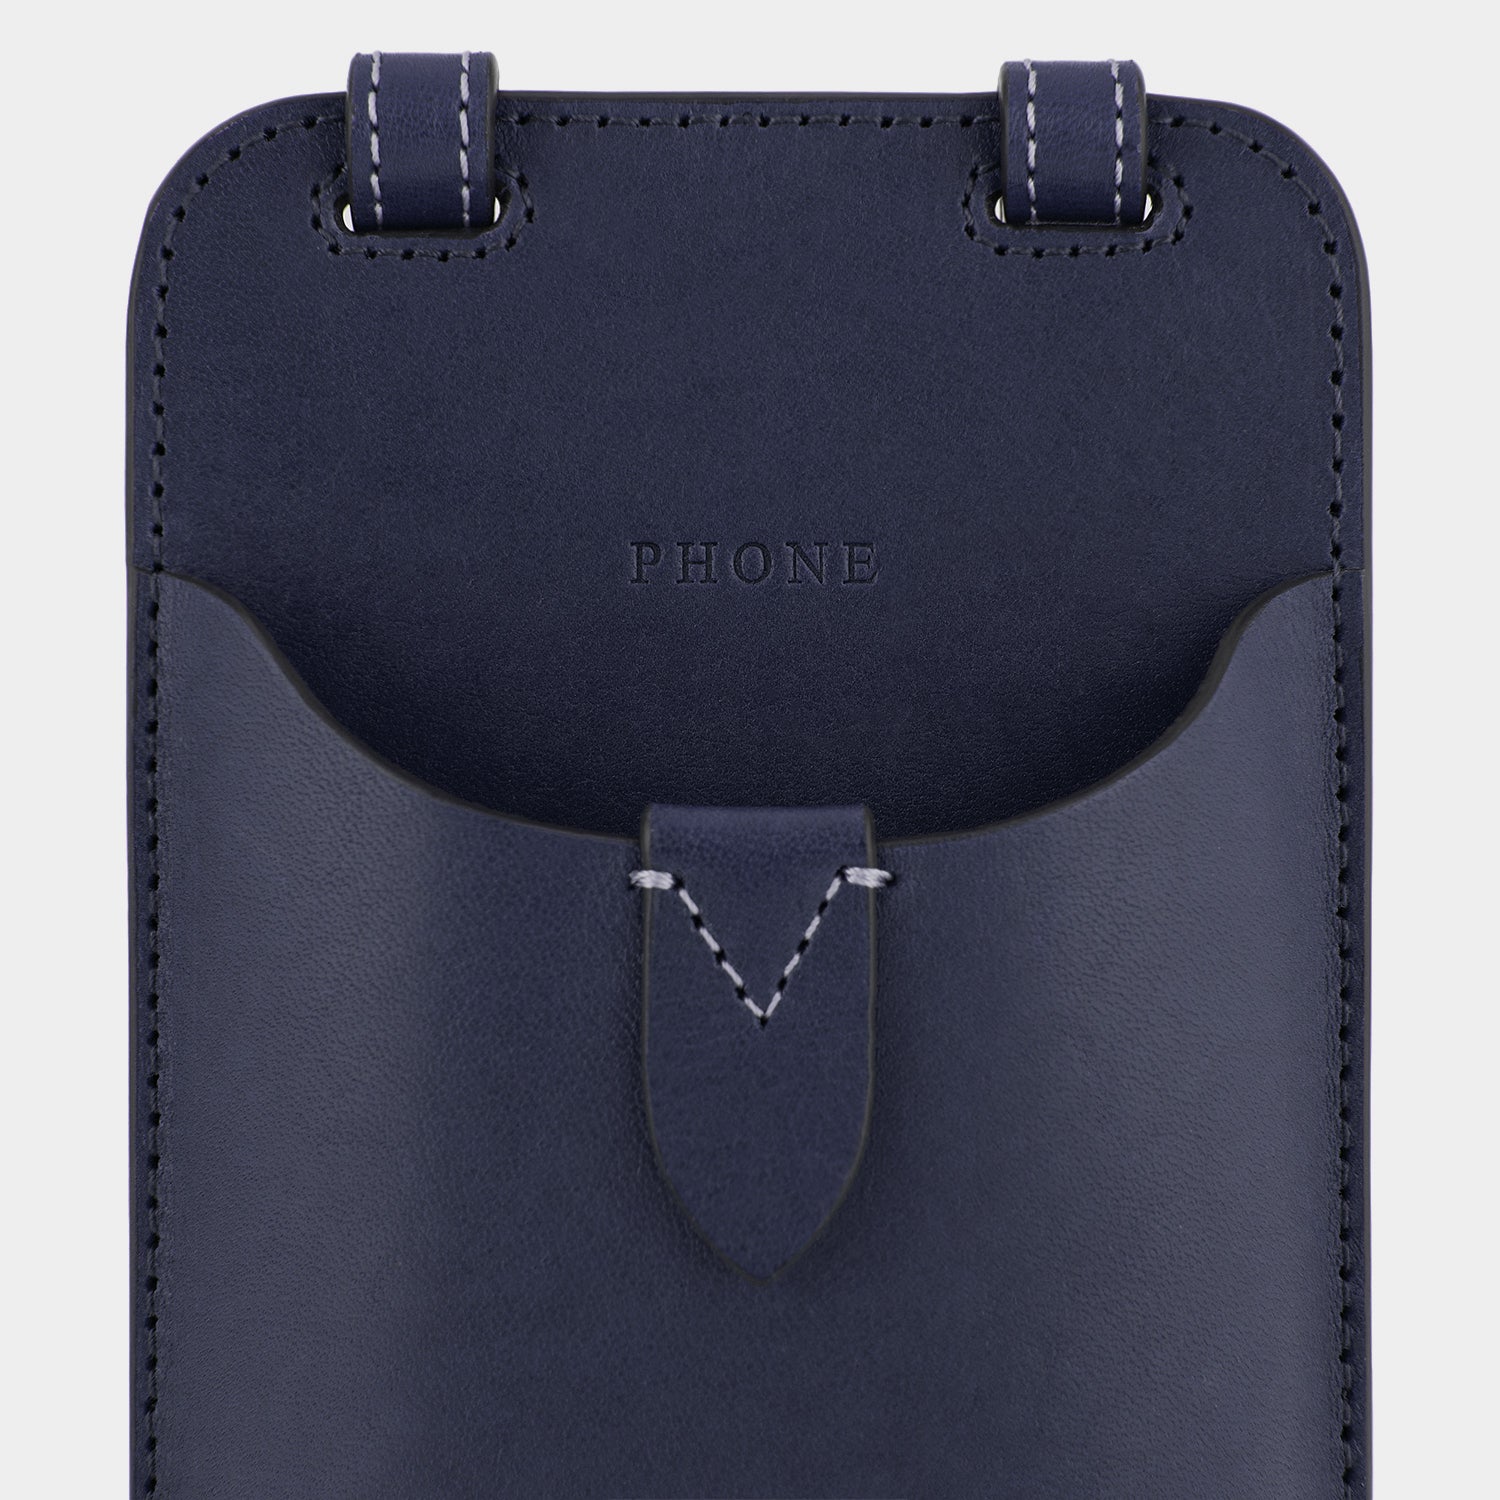 Return to Nature Phone Pouch on Strap -

                  
                    Compostable Leather in Marine -
                  

                  Anya Hindmarch EU
